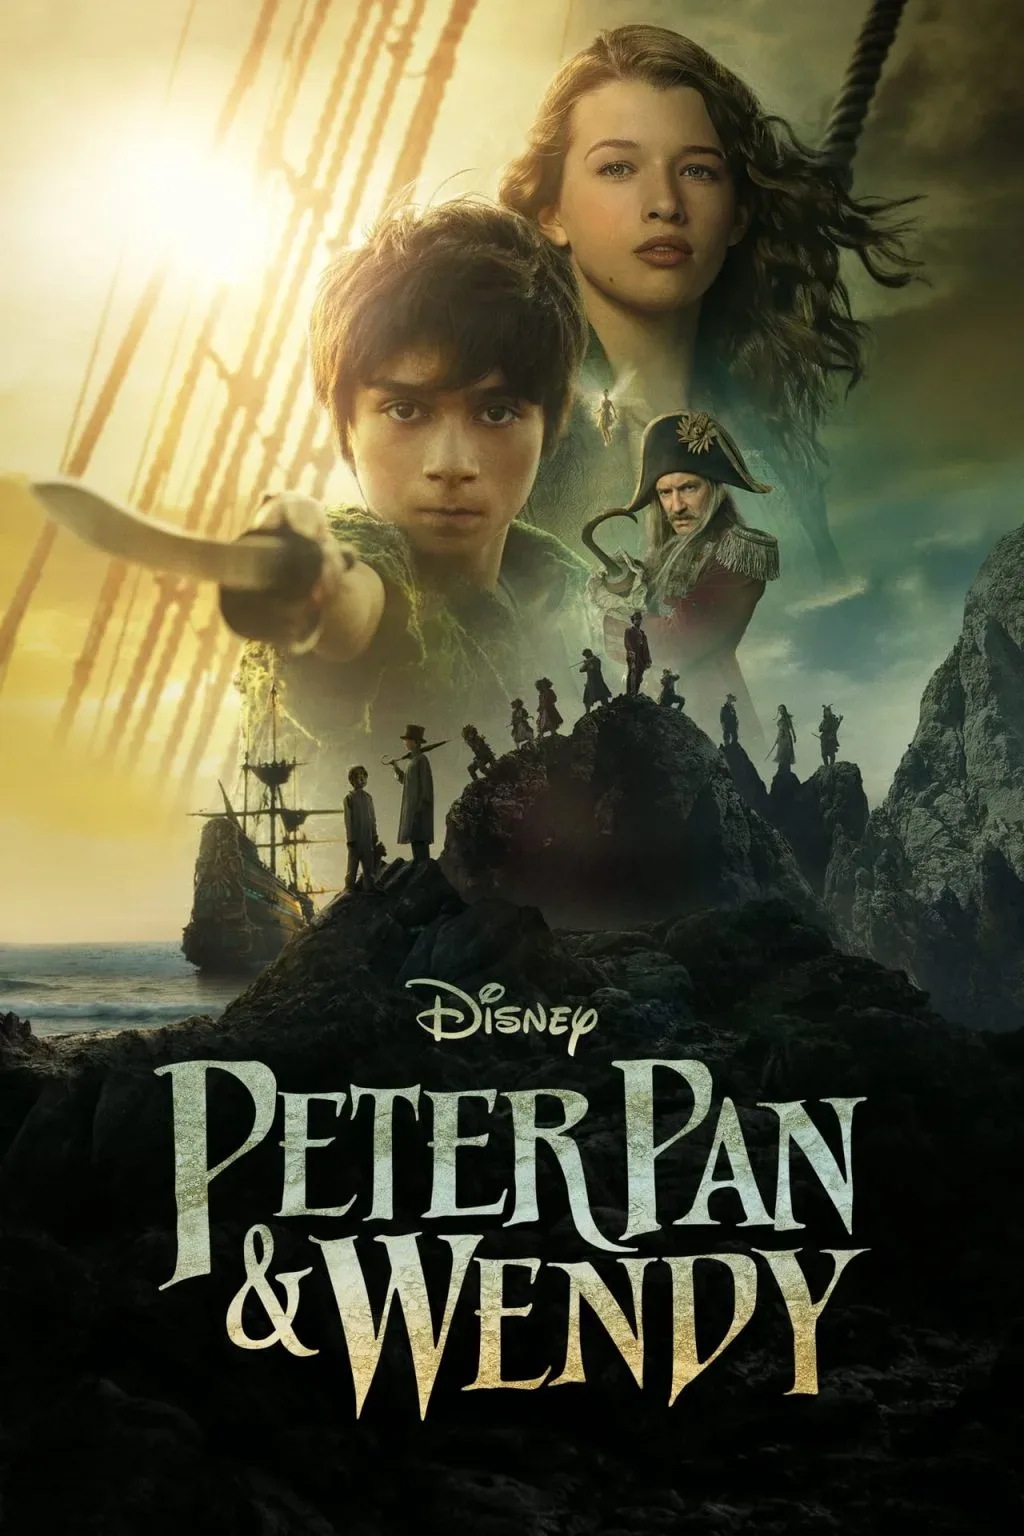 In the movie Peter Pan & Wendy - Wendy Darling, a young girl afraid to leave her childhood home behind, meets Peter Pan, a boy who refuses to grow up. Alongside her brothers and a tiny fairy, Tinker Bell, she travels with Peter to the magical world of Neverland. There, she encounters an evil pirate captain, Captain Hook, and embarks on a thrilling adventure that will change her life forever.